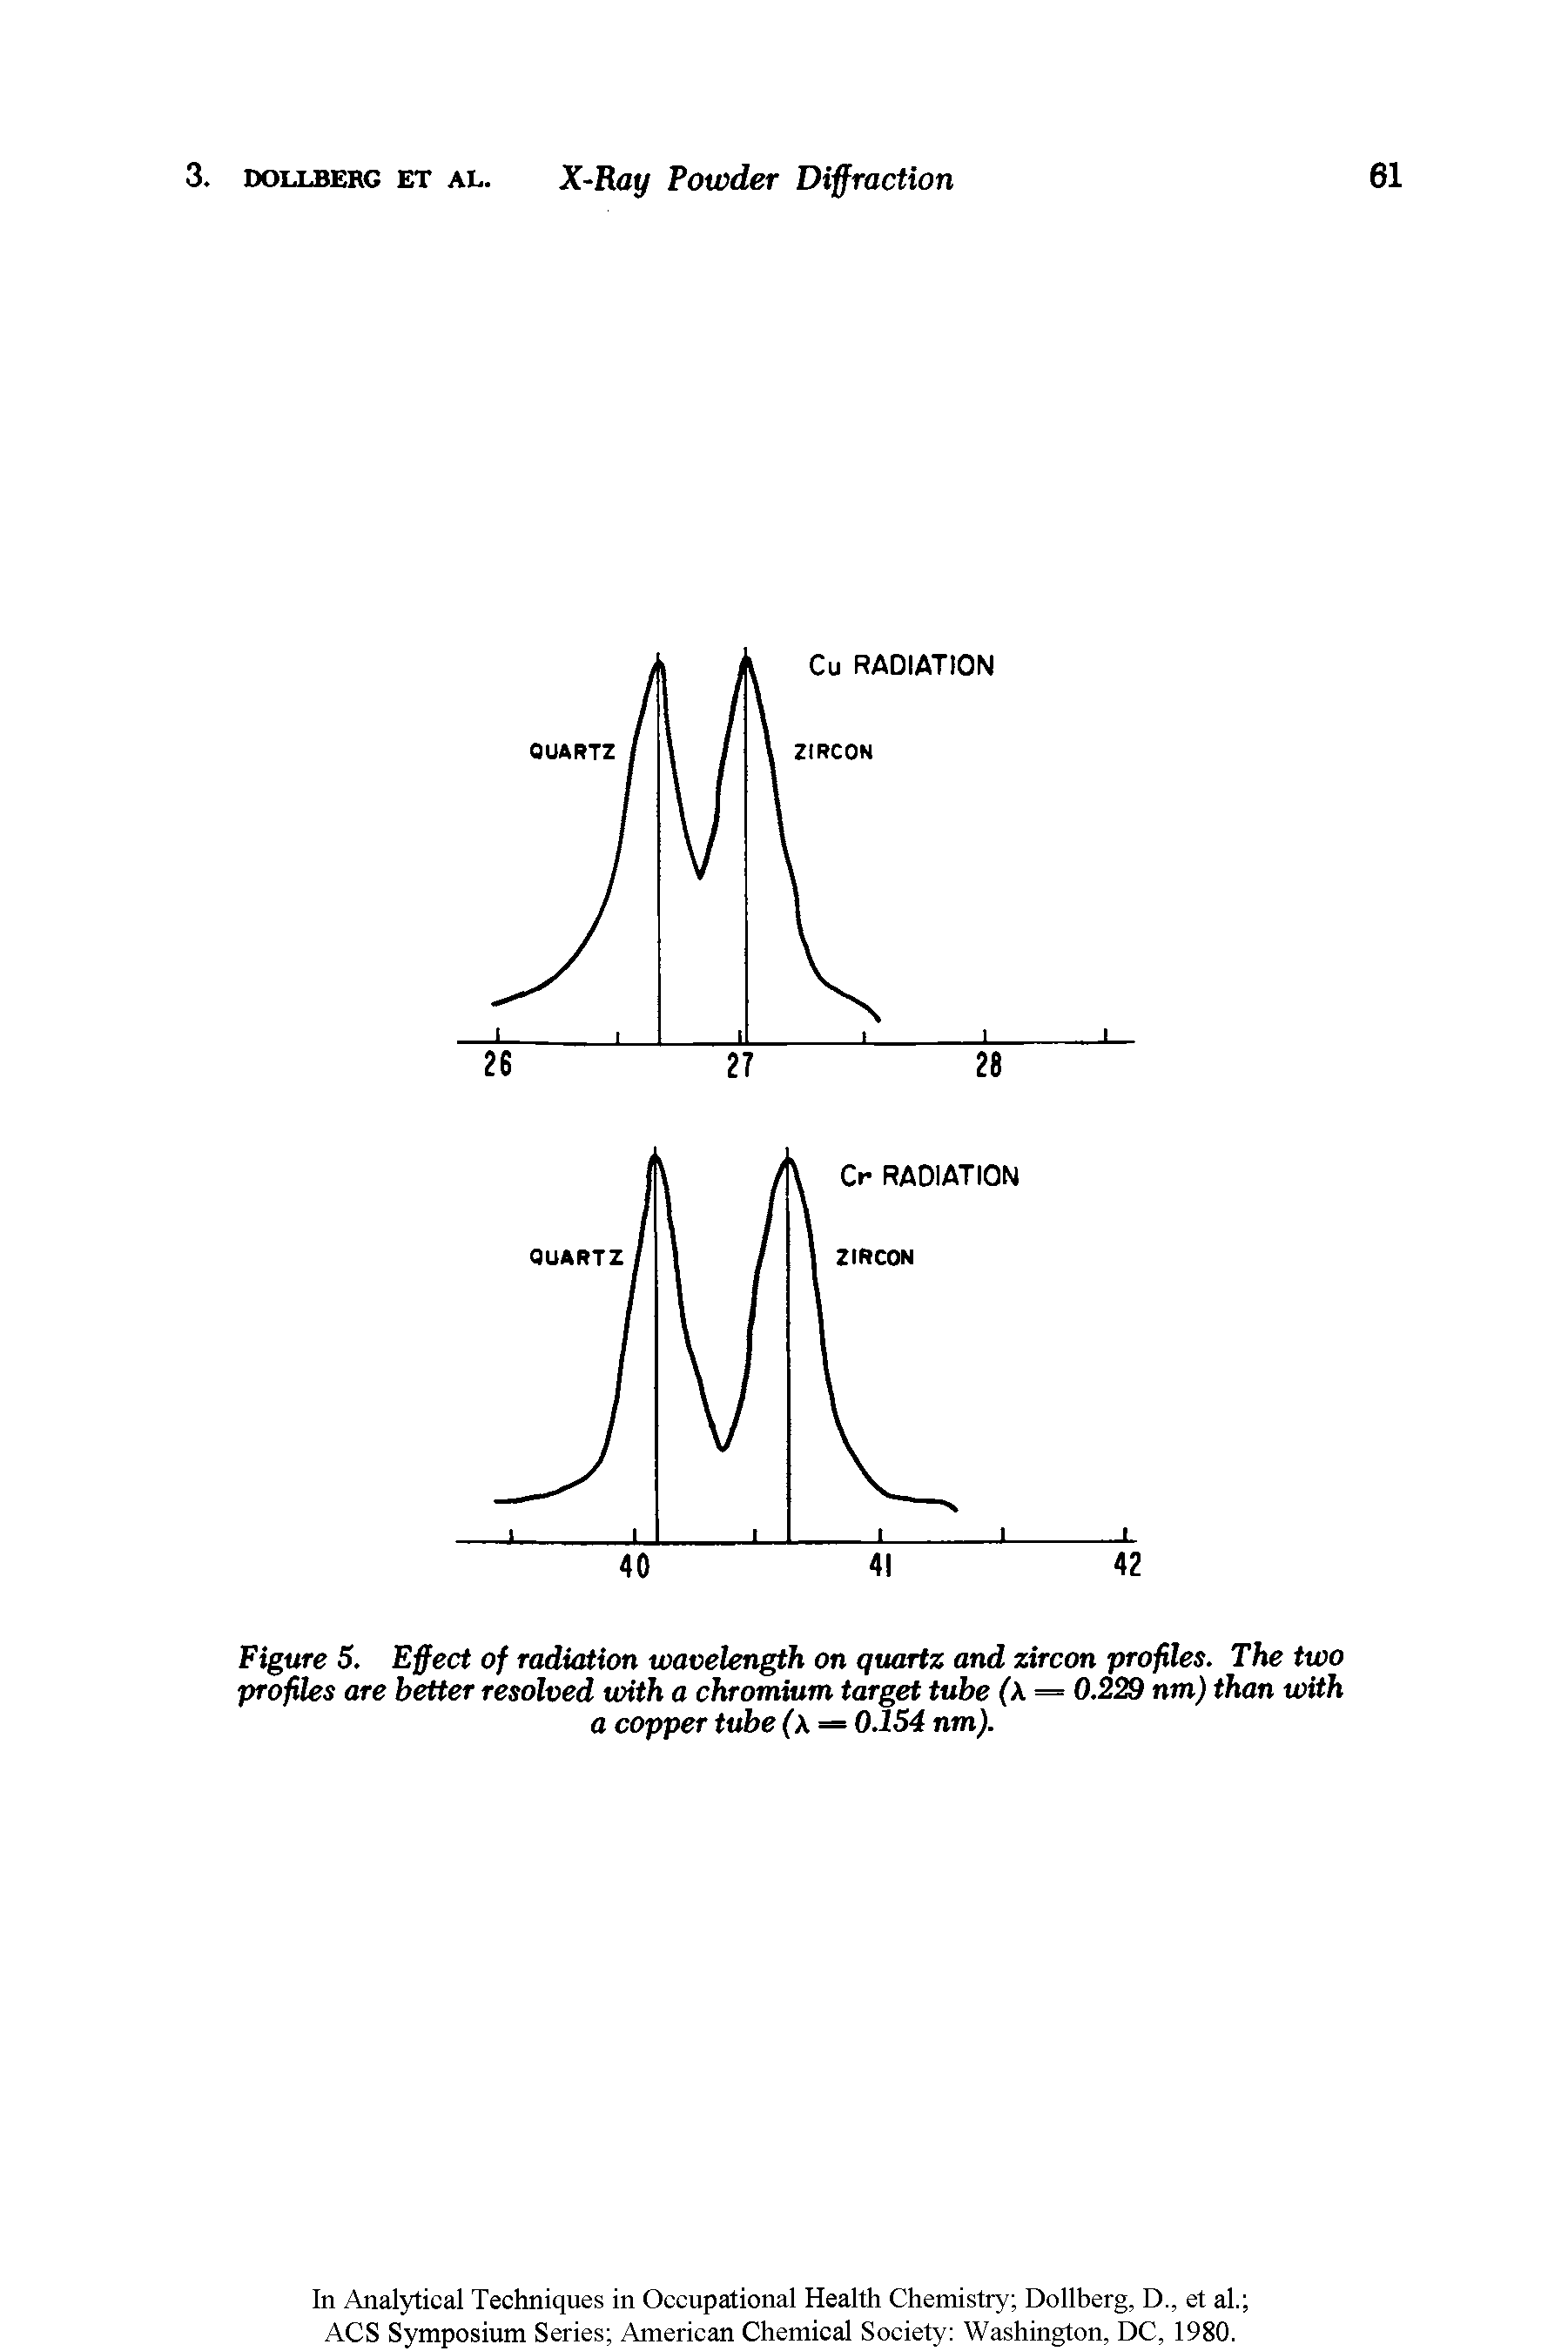 Figure 5. Effect of radiation wavelength on quartz and zircon profiles. The two profiles are better resolved with a chromium target tube (k = 0.229 nm) than with a copper tube (k = 0.154 nm).